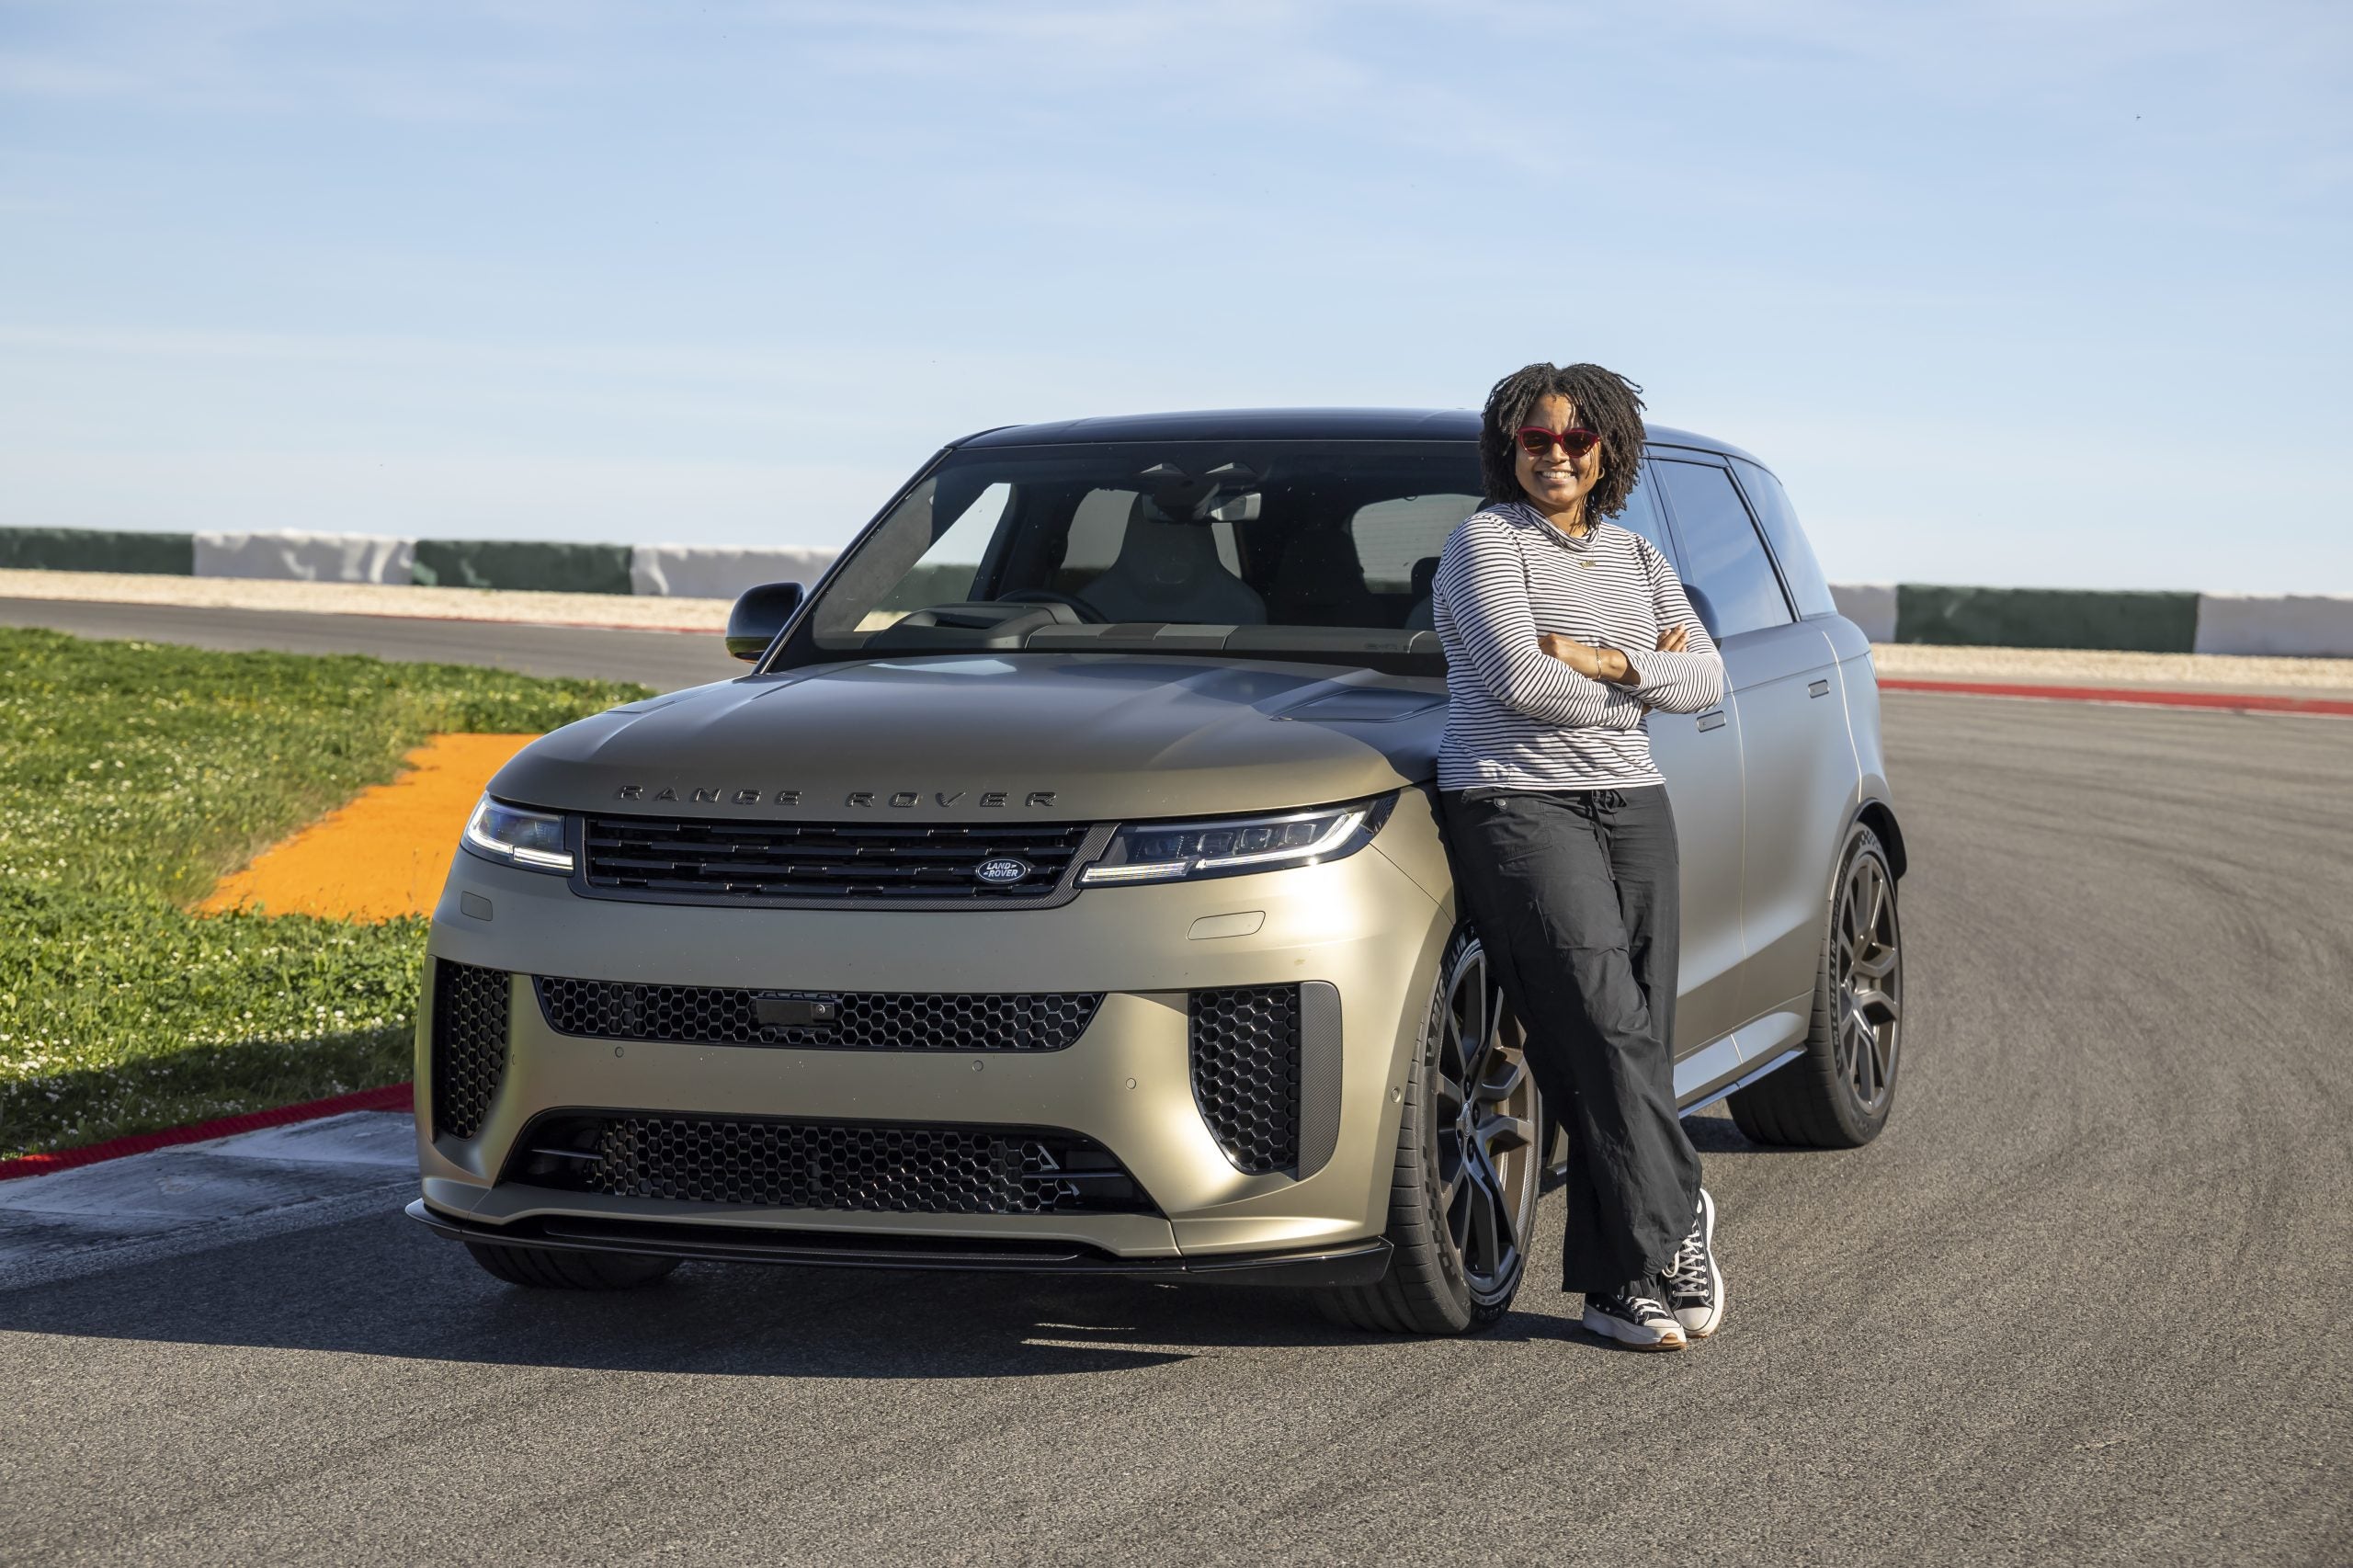 Get Yourself A Car That Can Do Both: The New Range Rover Sport SV Is Fast And Incredibly Functional